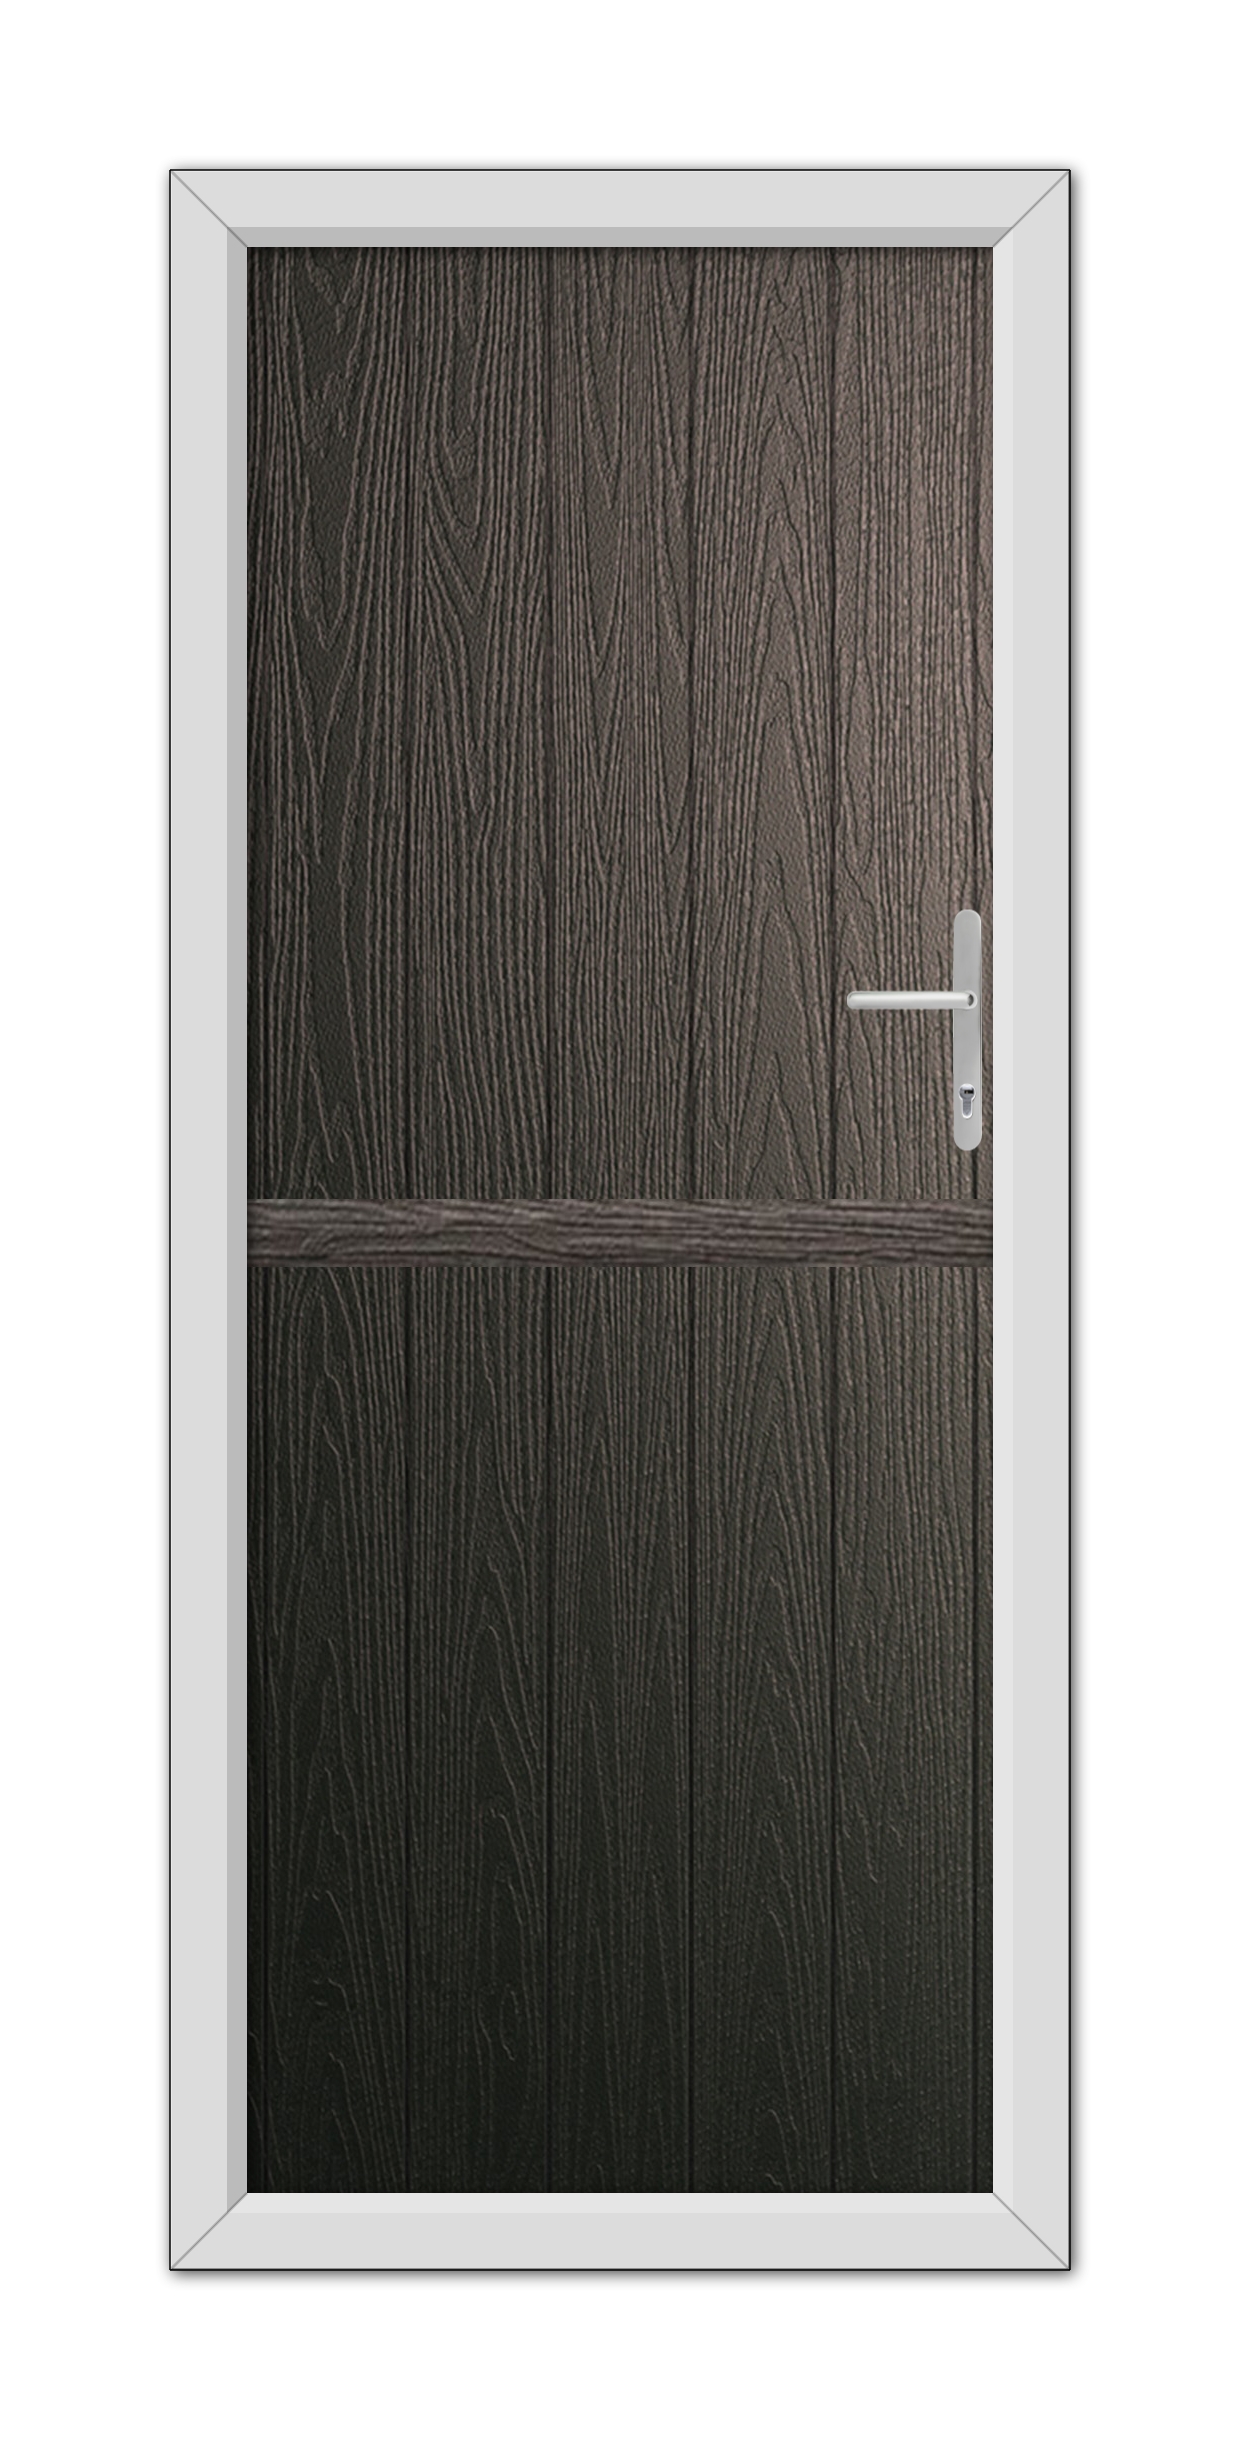 A Schwarzbraun Gloucester Stable Composite Door 48mm Timber Core with a horizontal metal handle, set within a white frame, isolated on a white background.